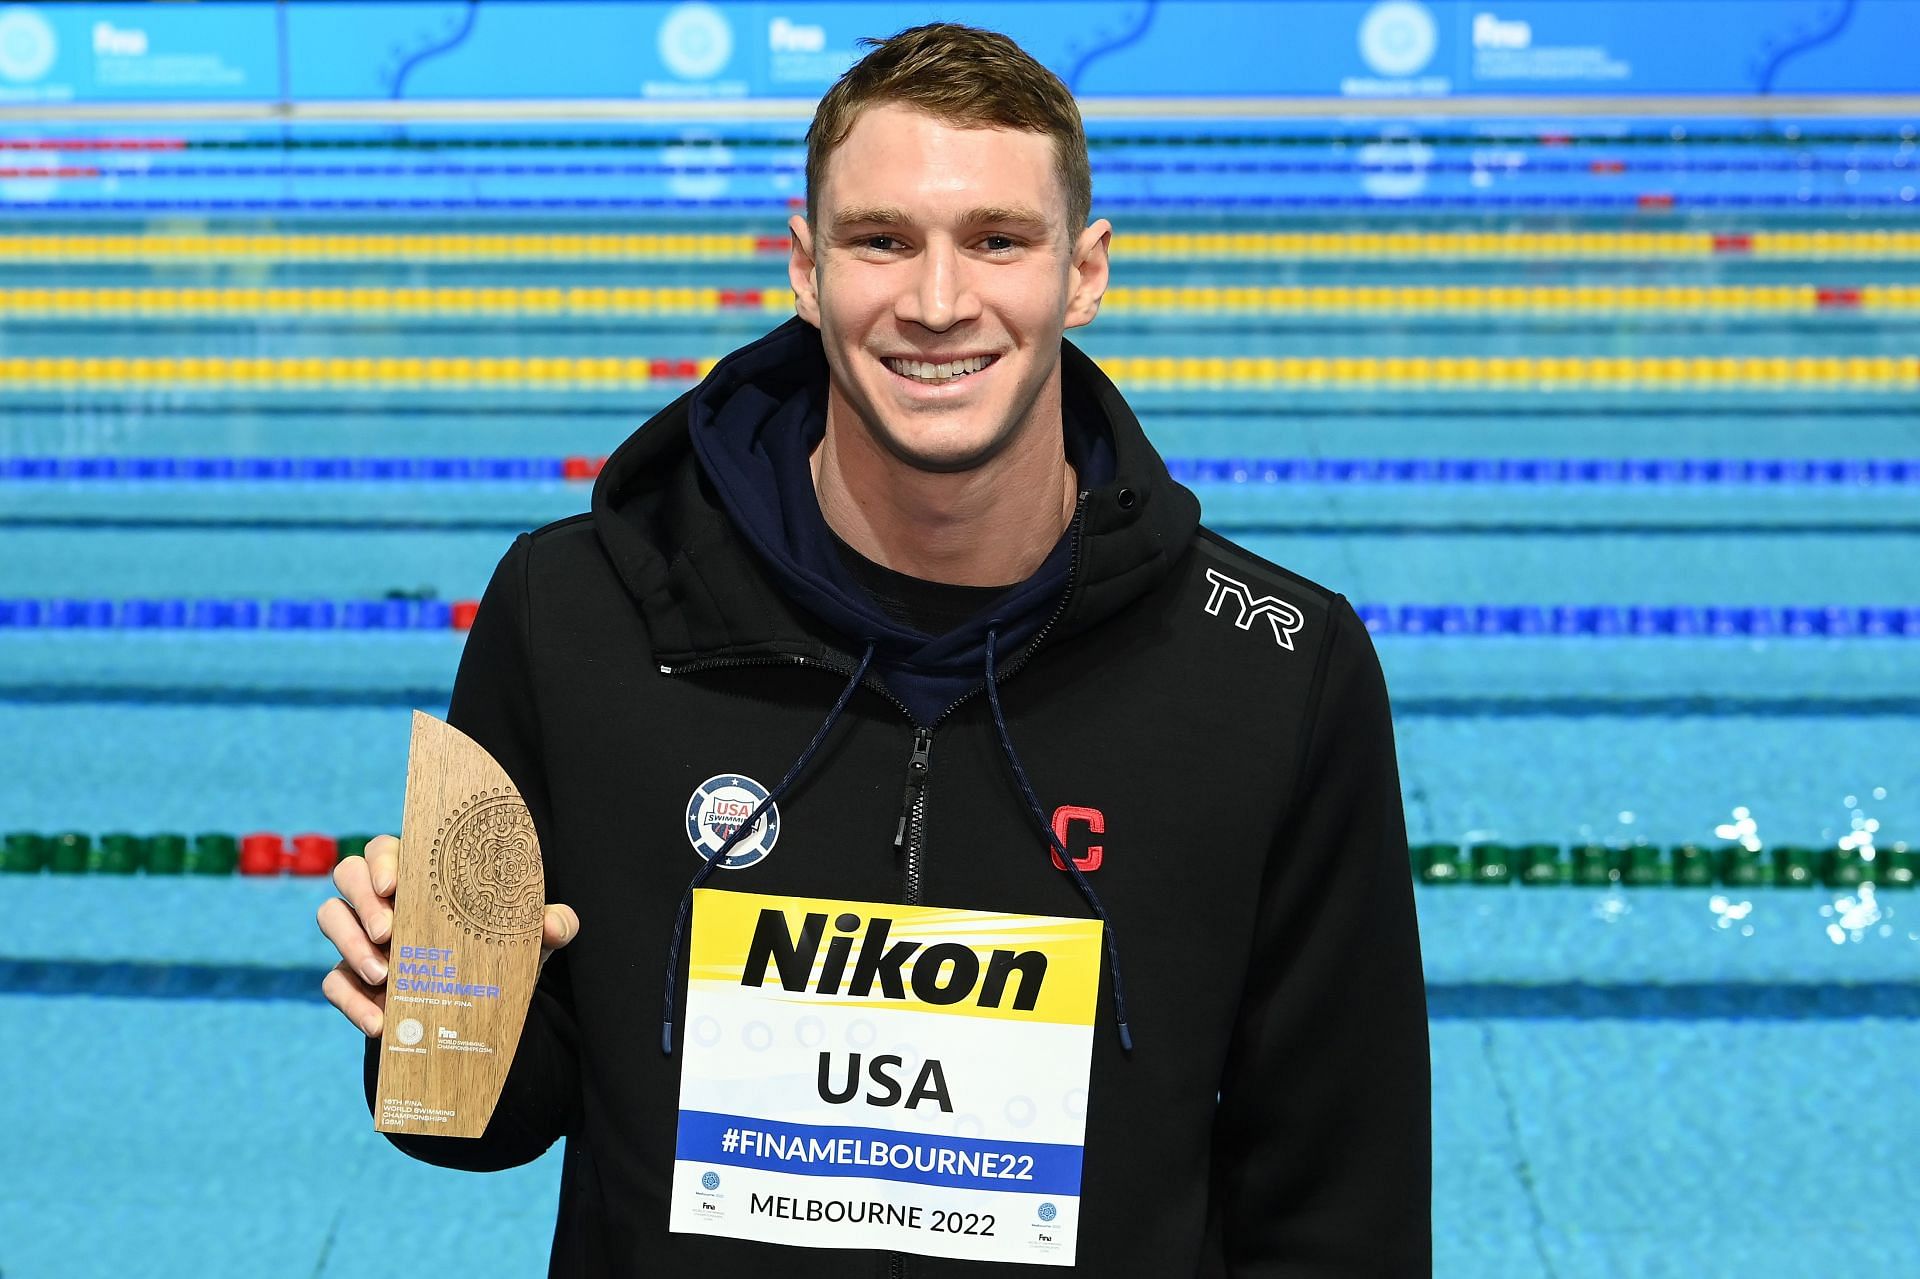 Ryan Murphy poses with the Best Male Swimmer Award at the 2022 FINA World Short Course Swimming Championships in Melbourne, Australia